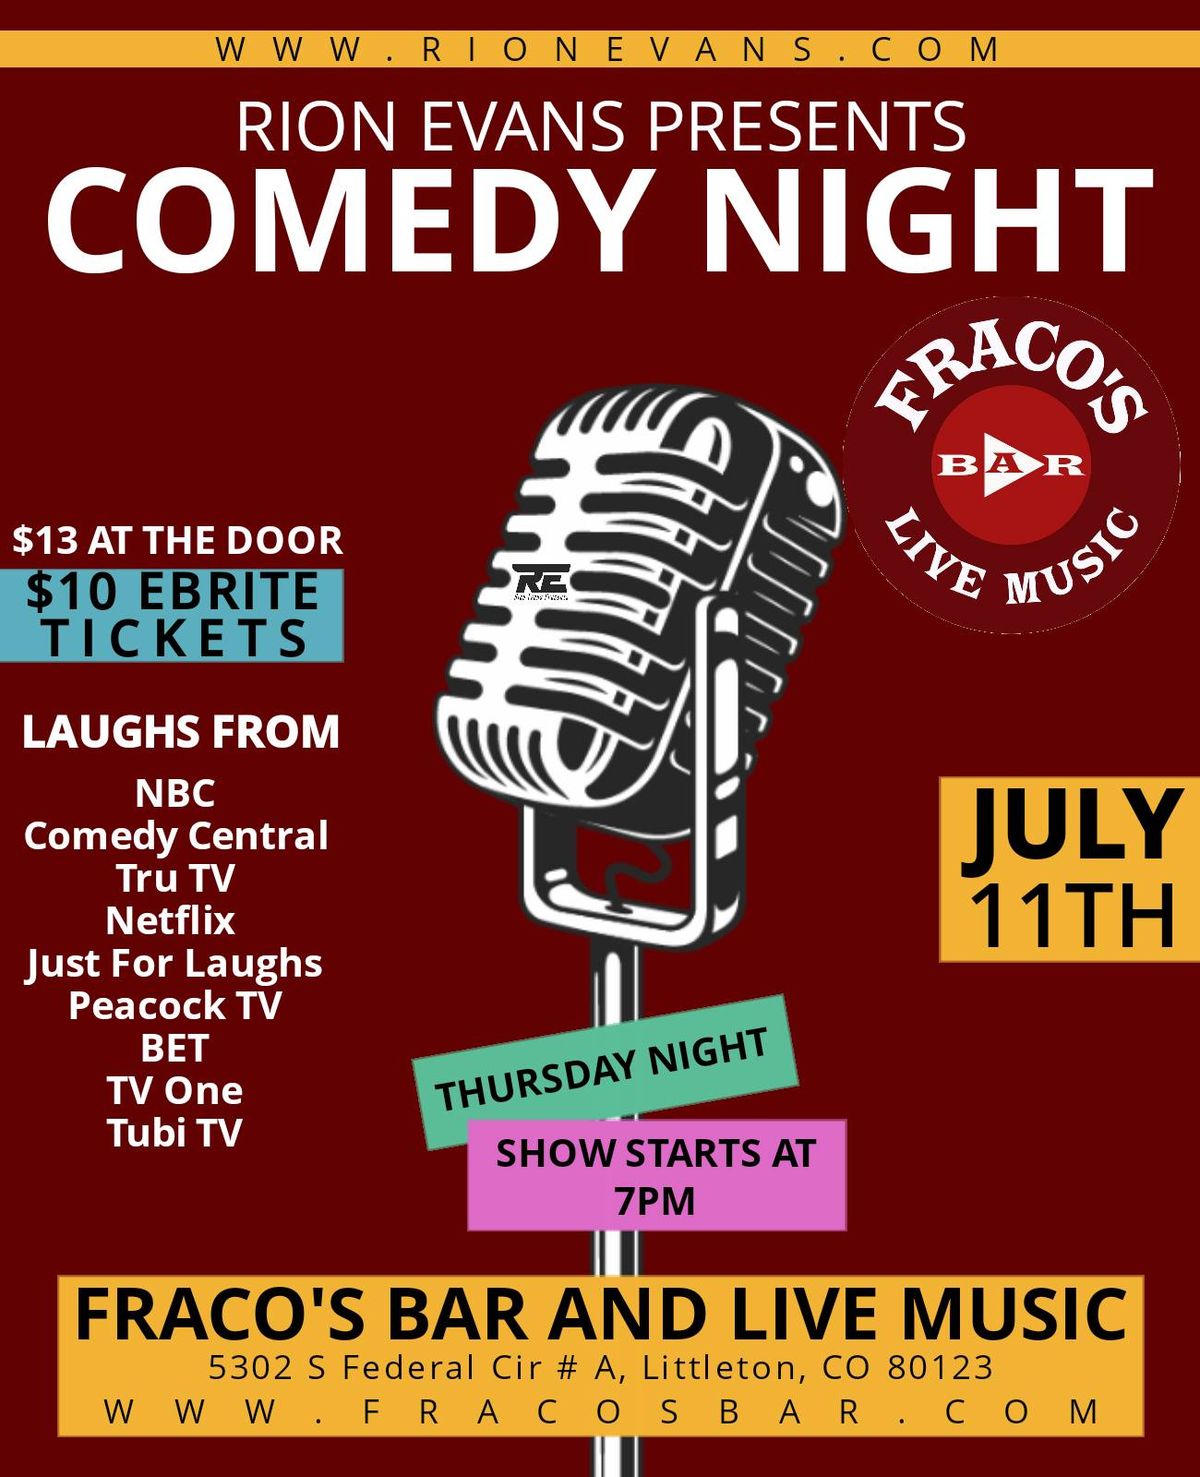 RION EVANS PRESENTS COMEDY NIGHT AT FRACO'S BAR AND LIVE MUSIC